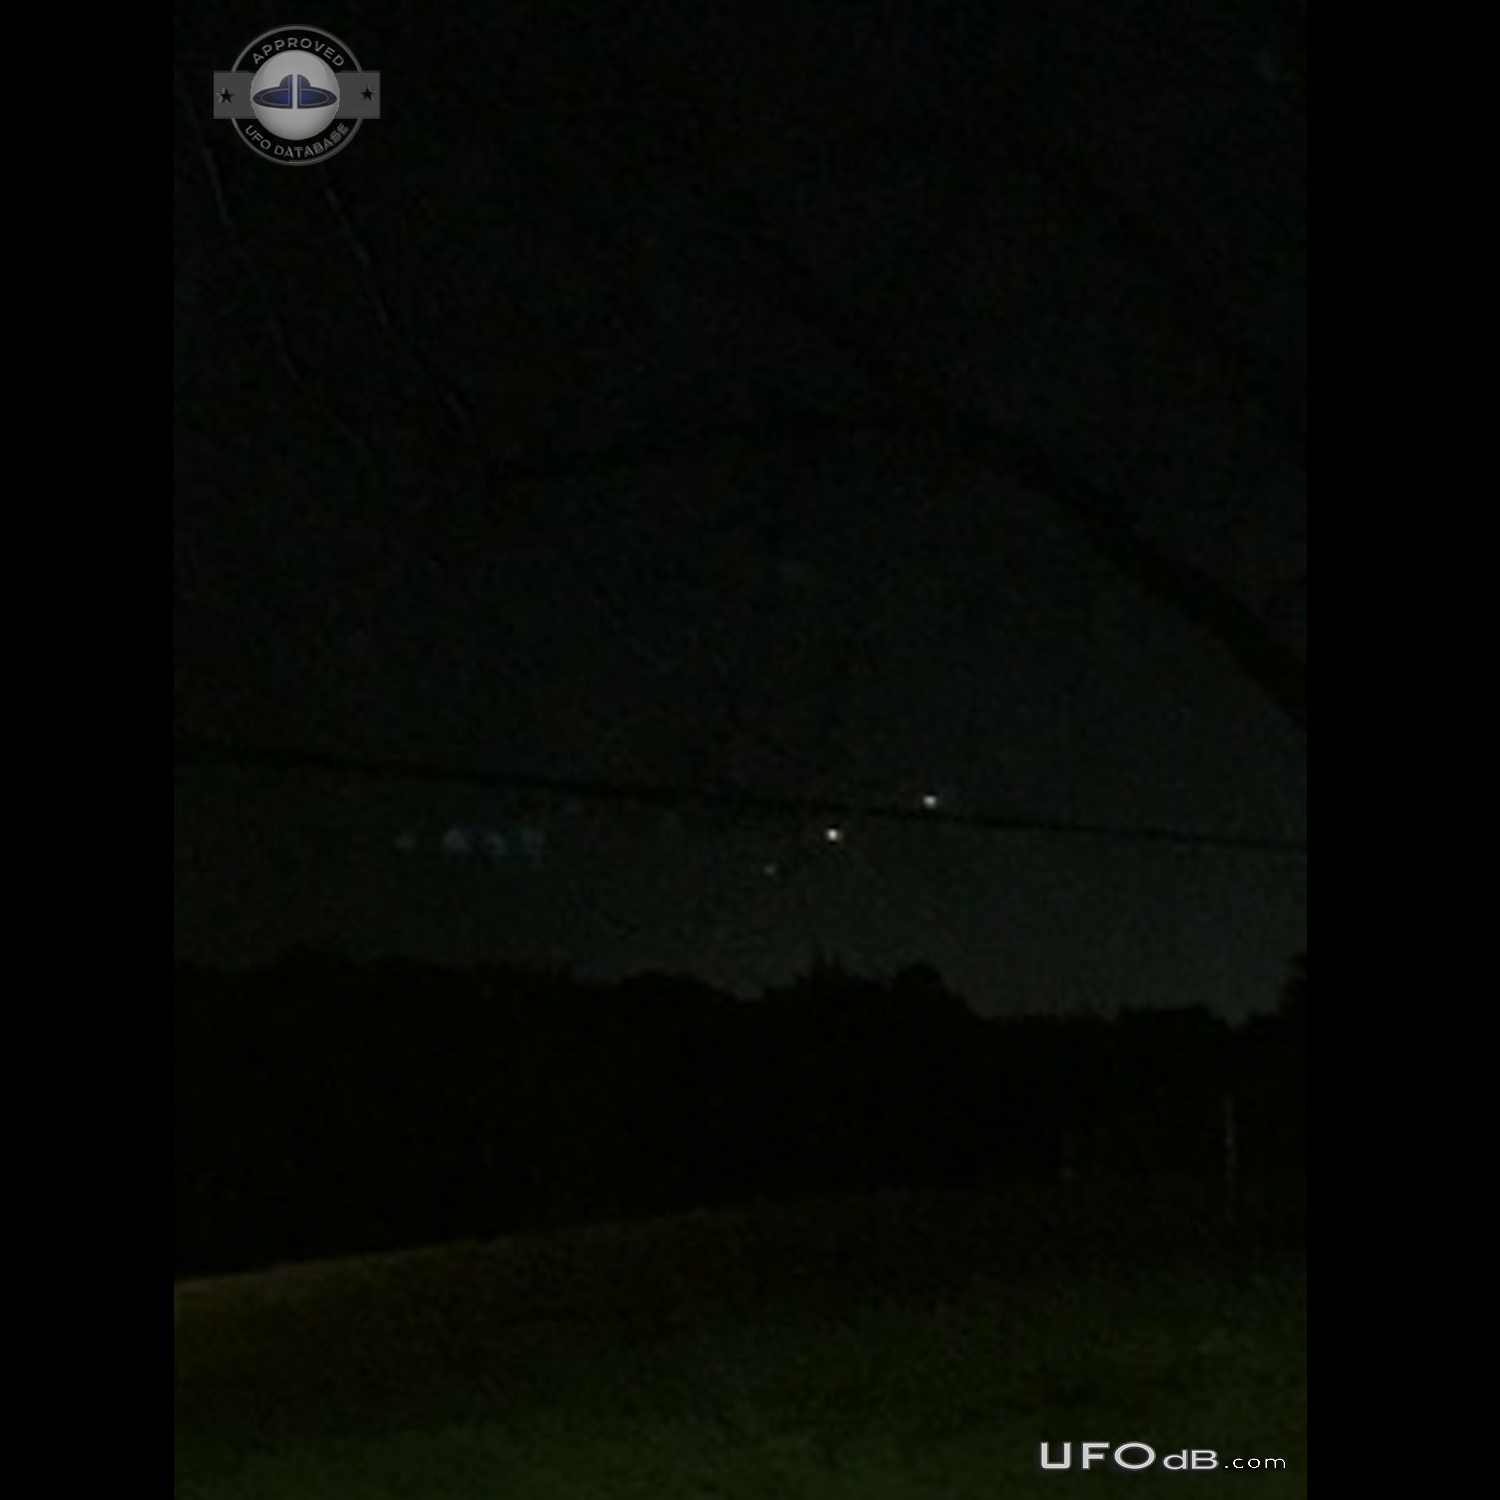 Perfect line of hovering UFOs low to ground - Hazelwood Missouri 2015 UFO Picture #737-1